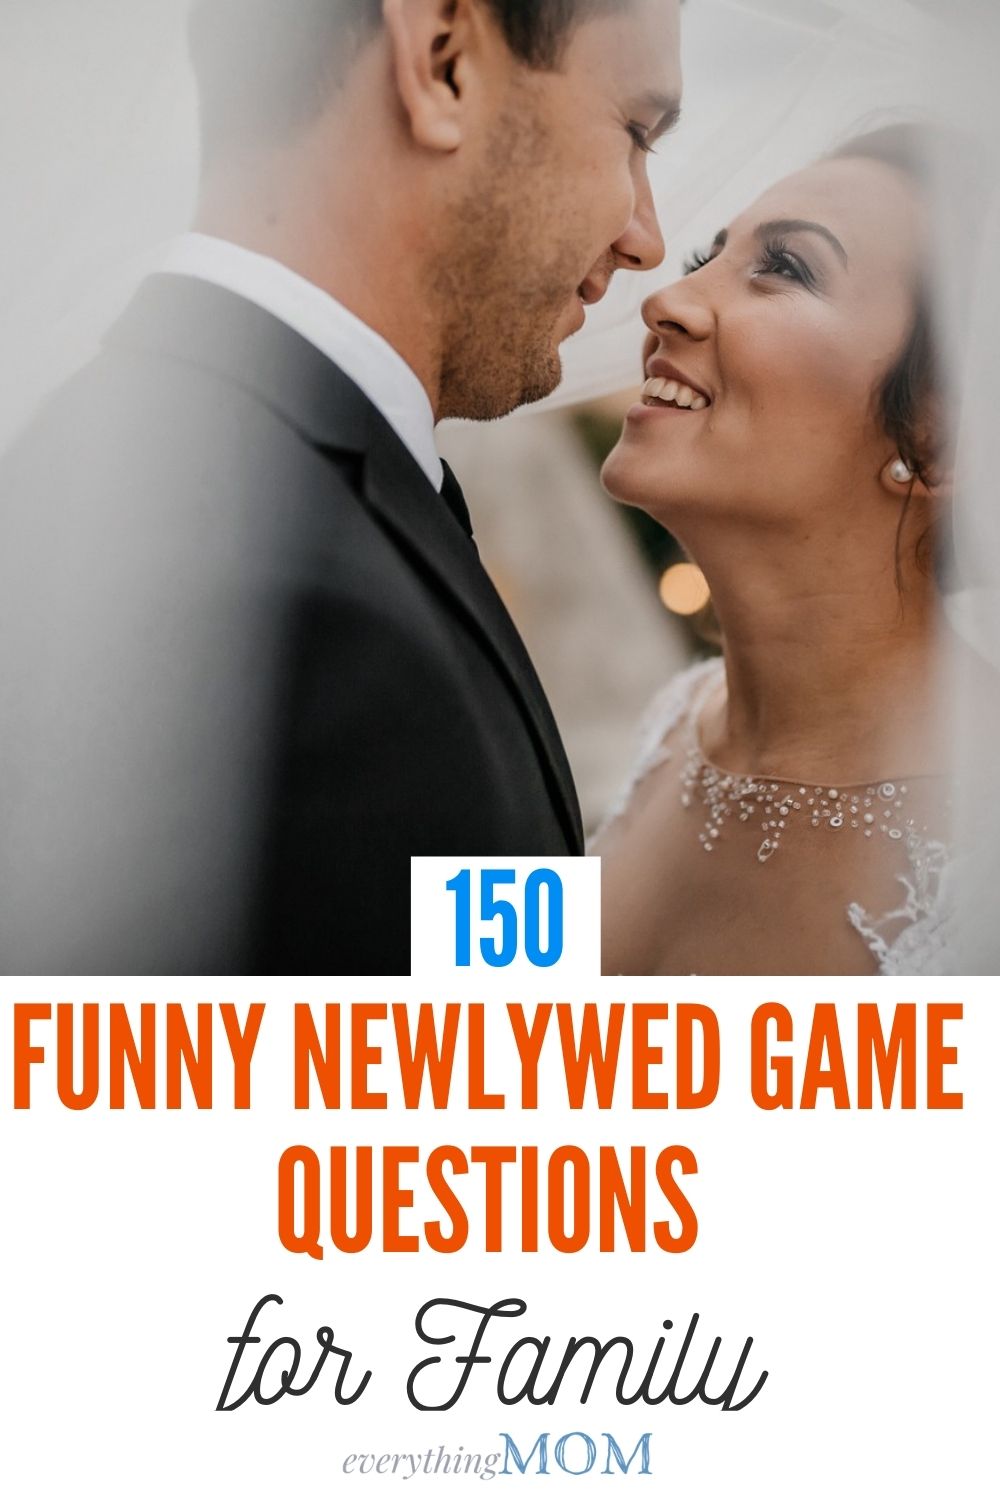 The dating game questions funny